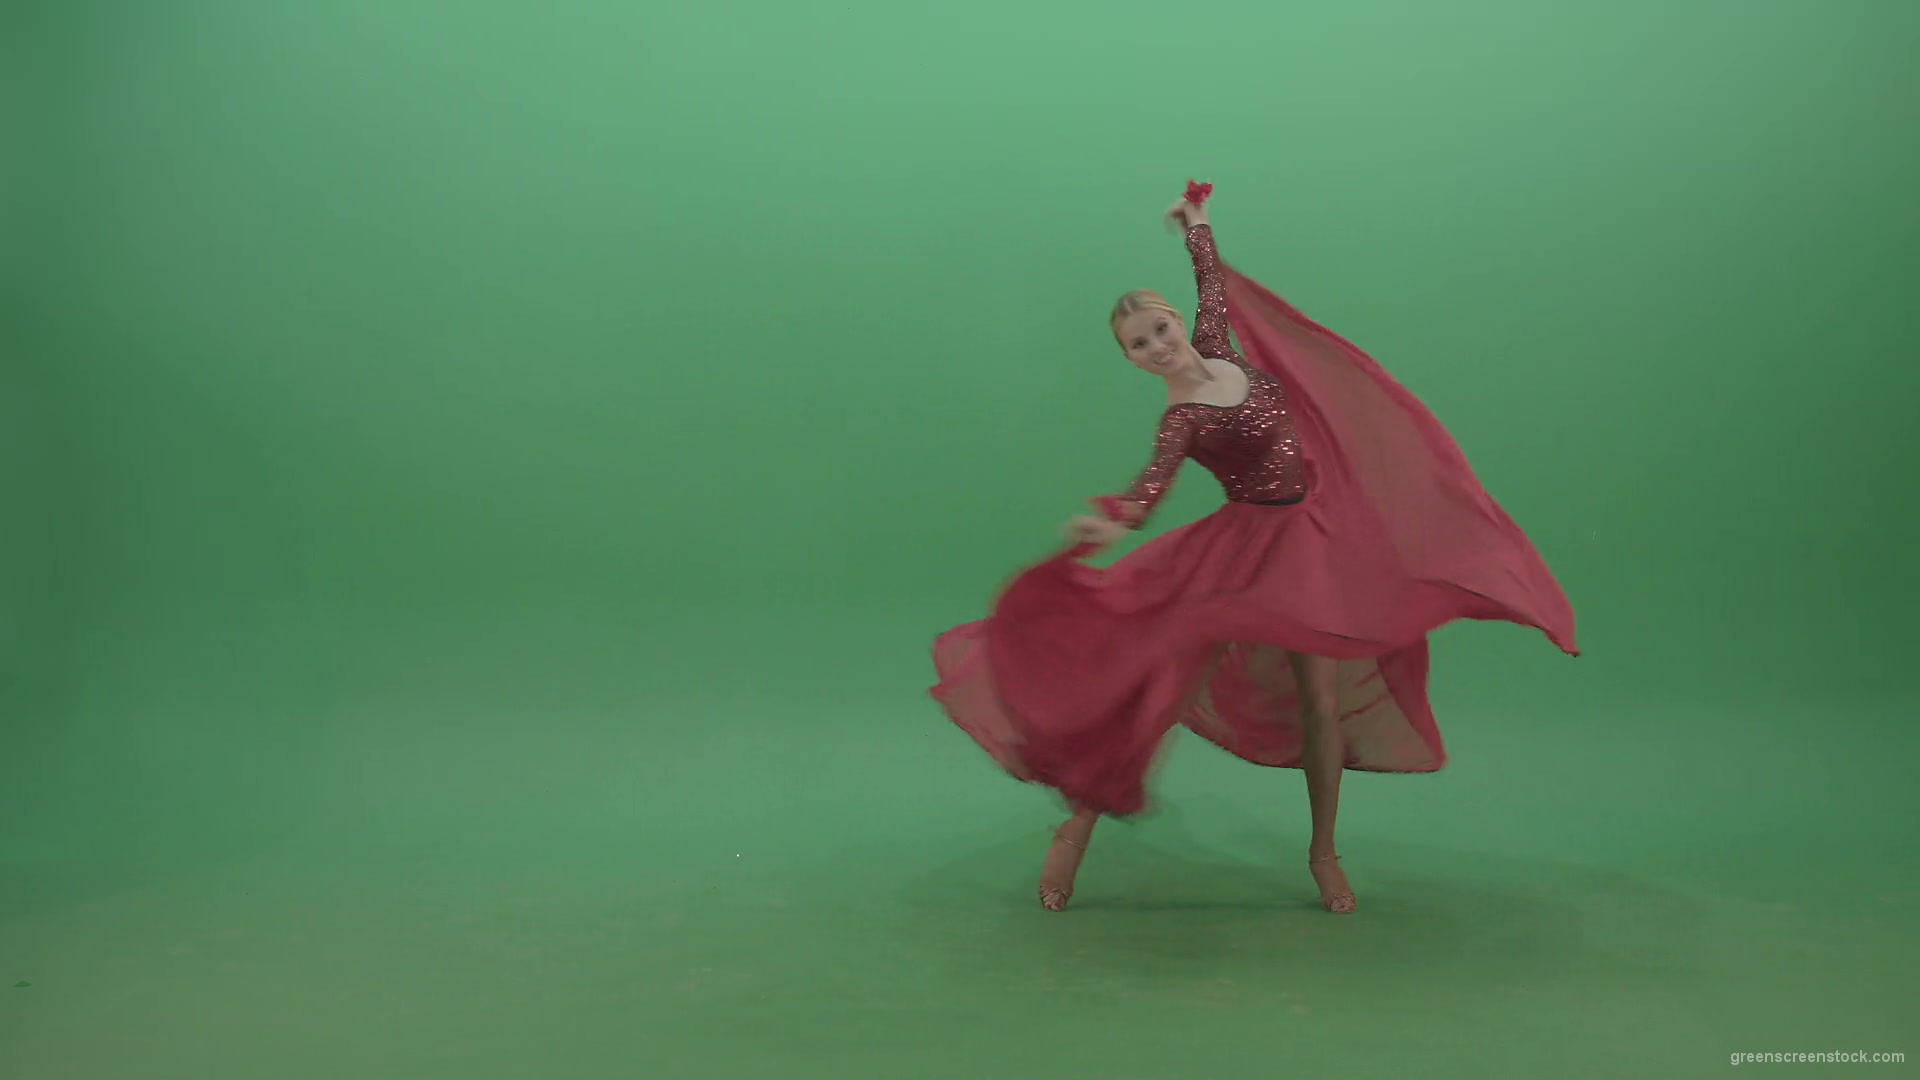 Spinning-woman-in-red-dress-showing-dance-flamenco-moves-over-green-screen-4K-Video-Footage-1920_007 Green Screen Stock